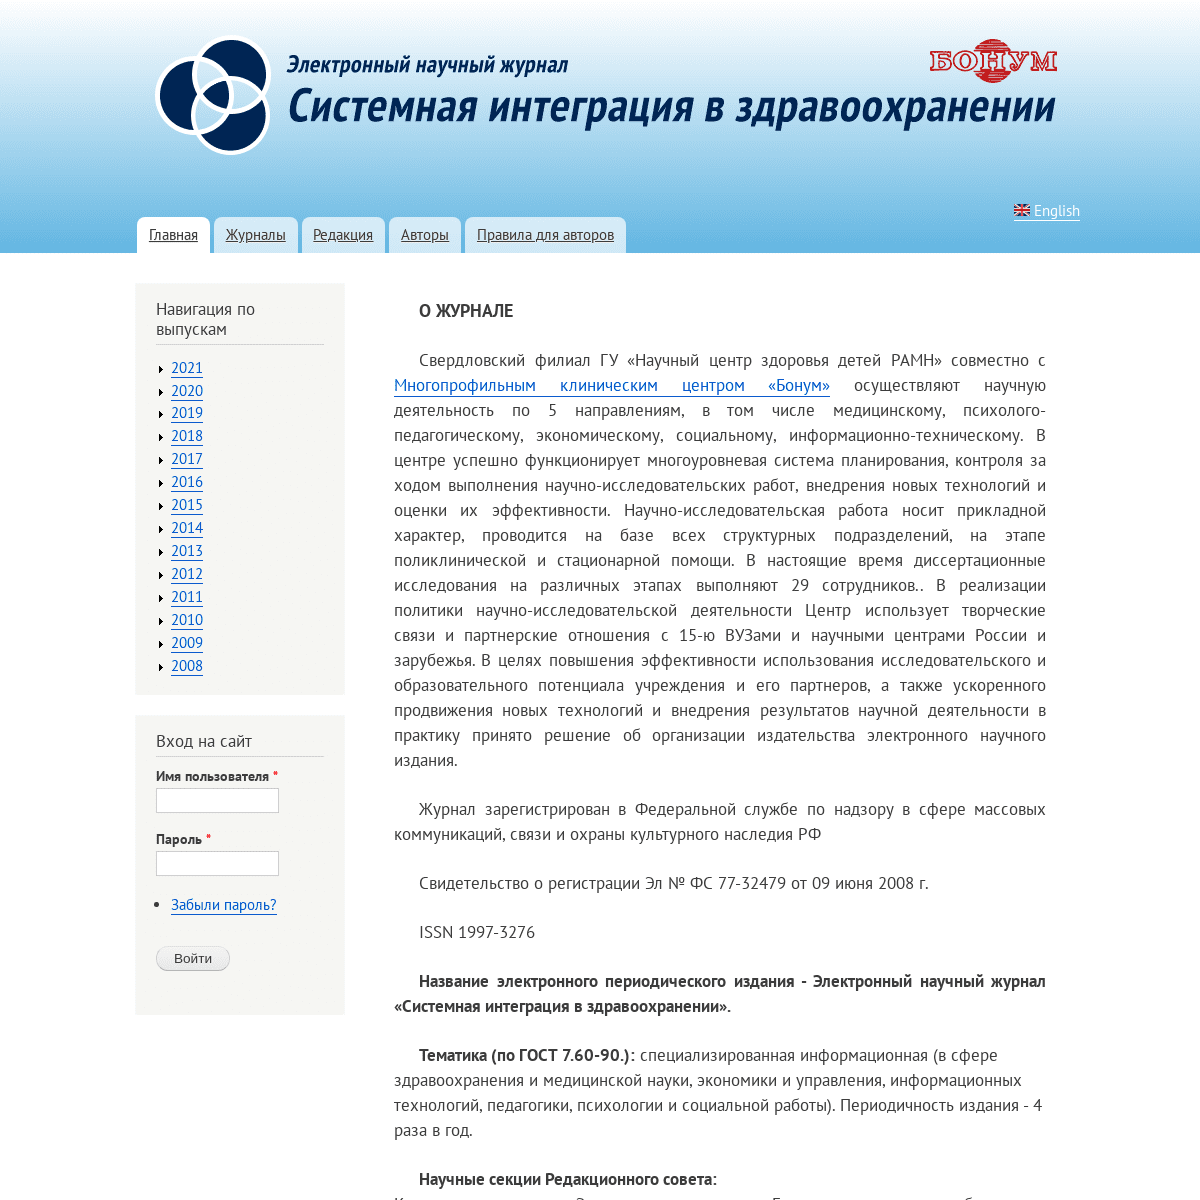 A complete backup of https://sys-int.ru